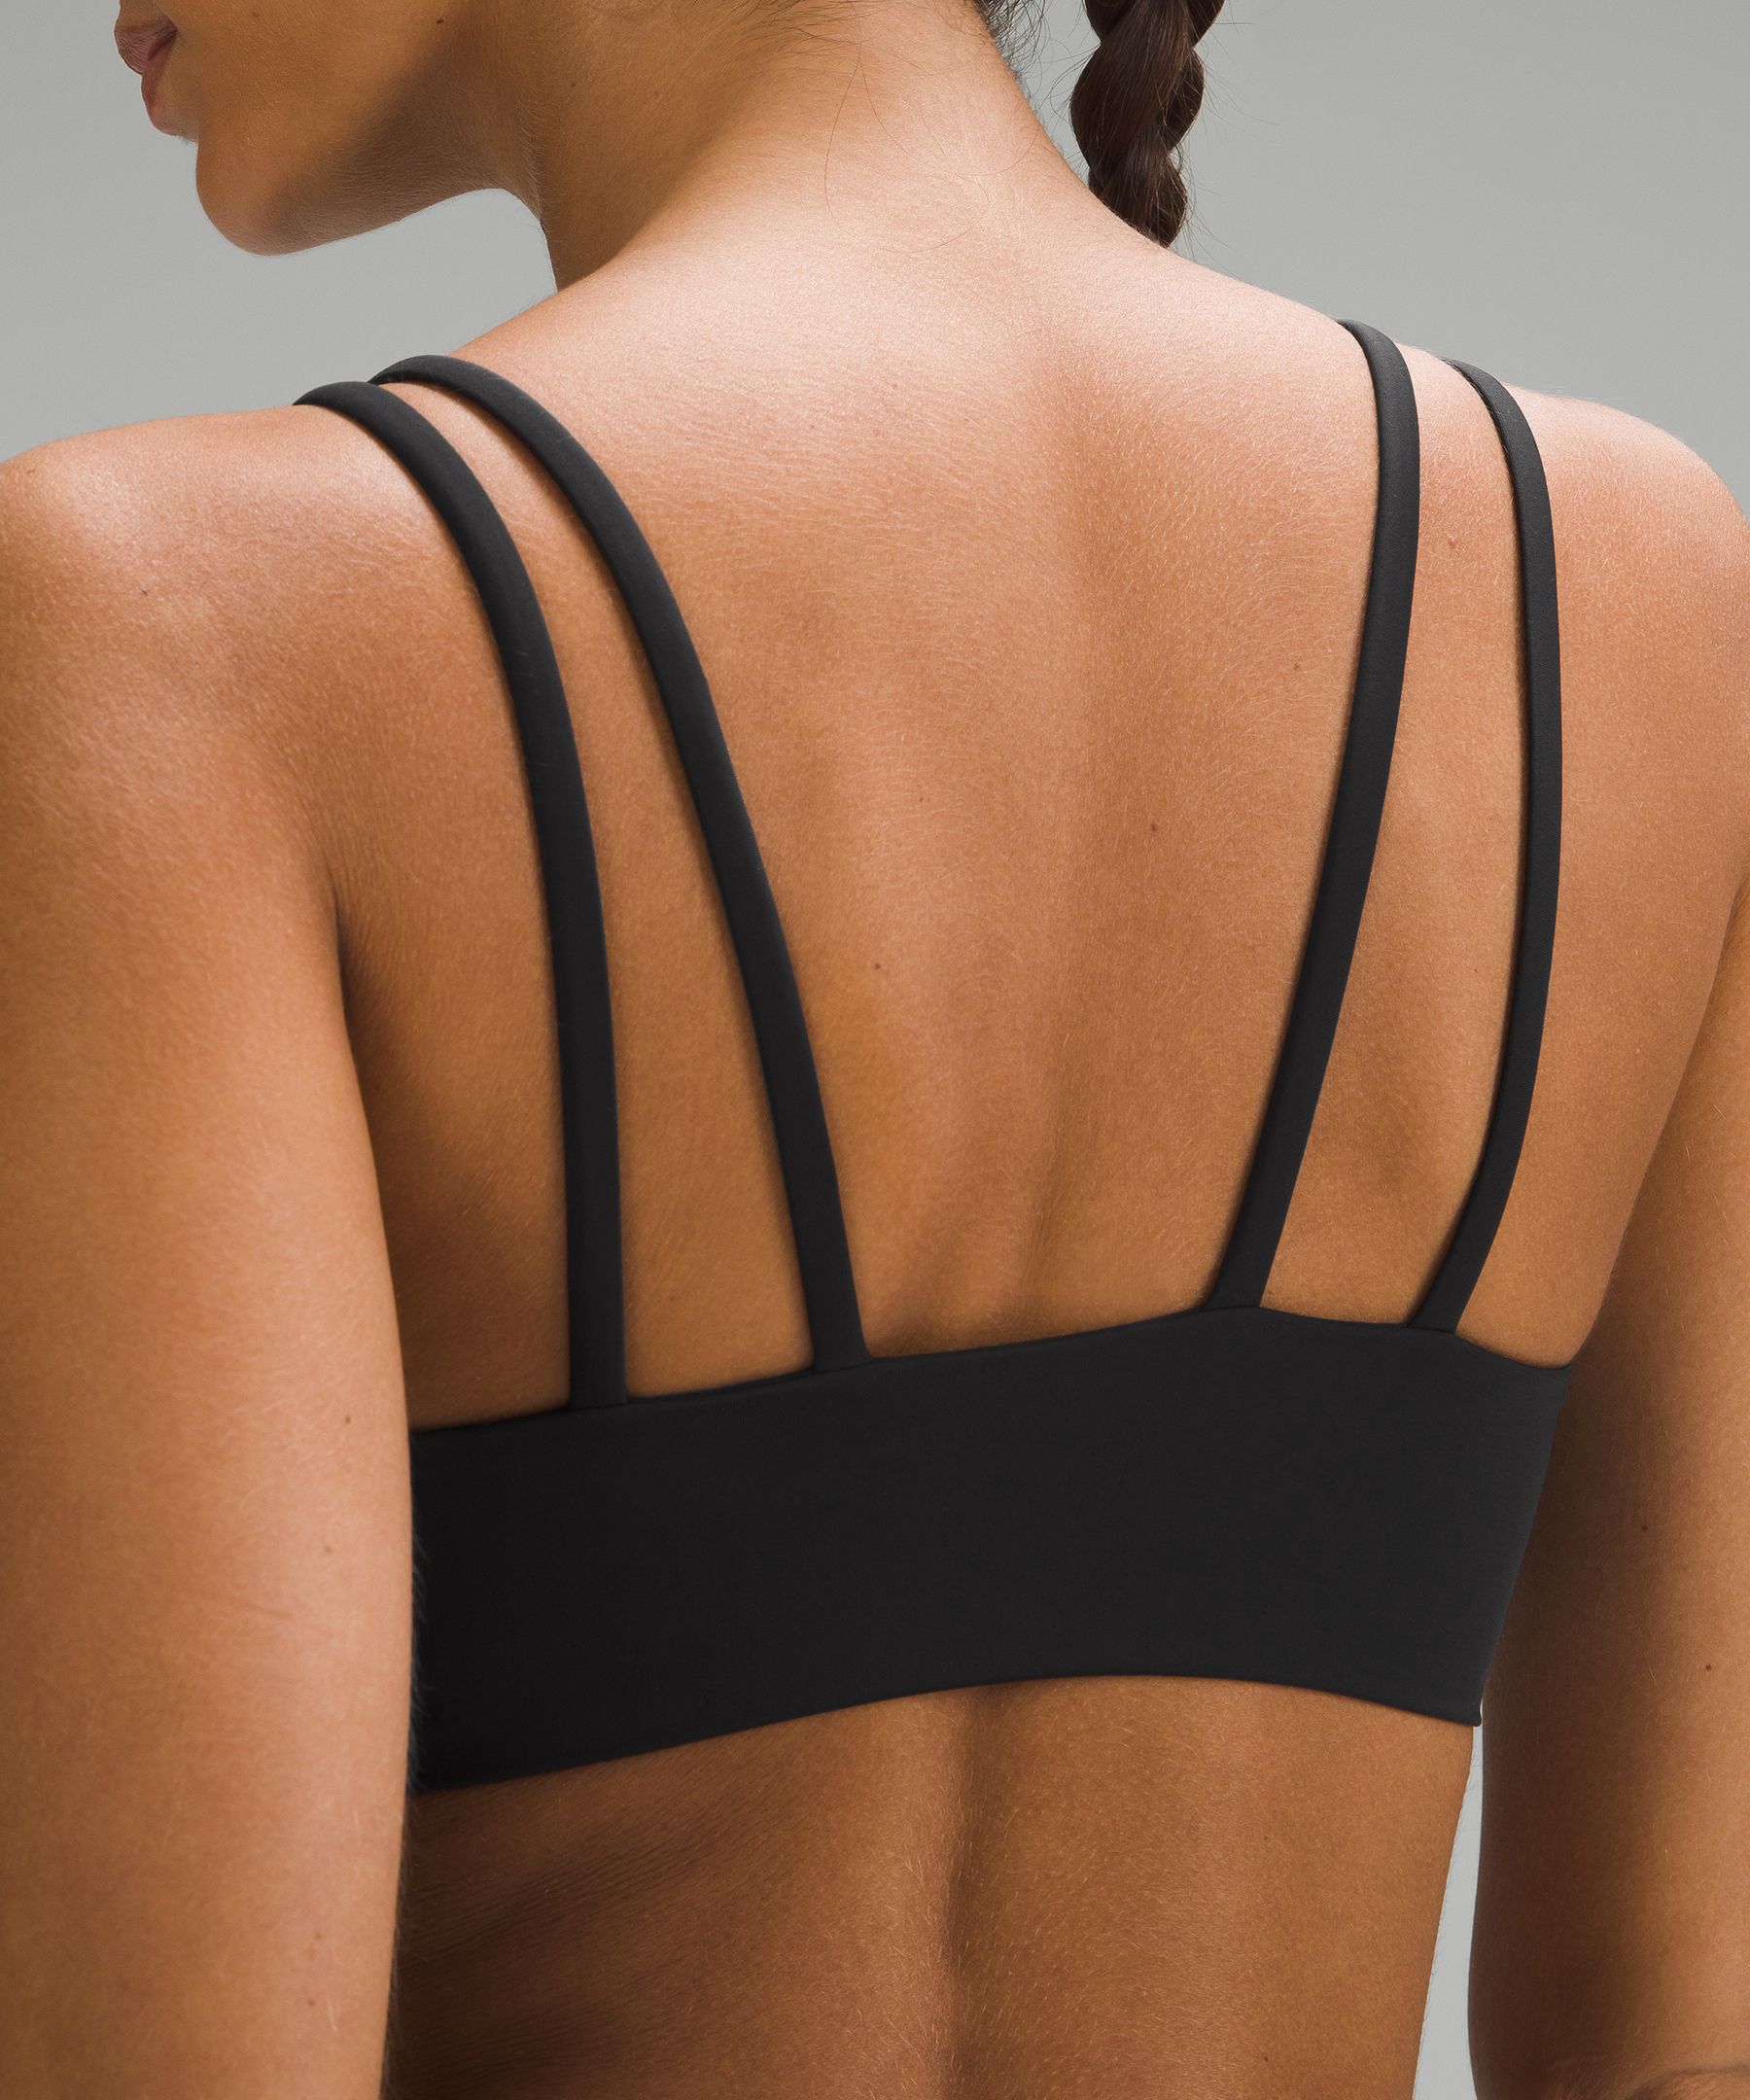 Like A Cloud Spaghetti Strap Bra (A/B) now available in US!! 🇺🇸 : r/ lululemon